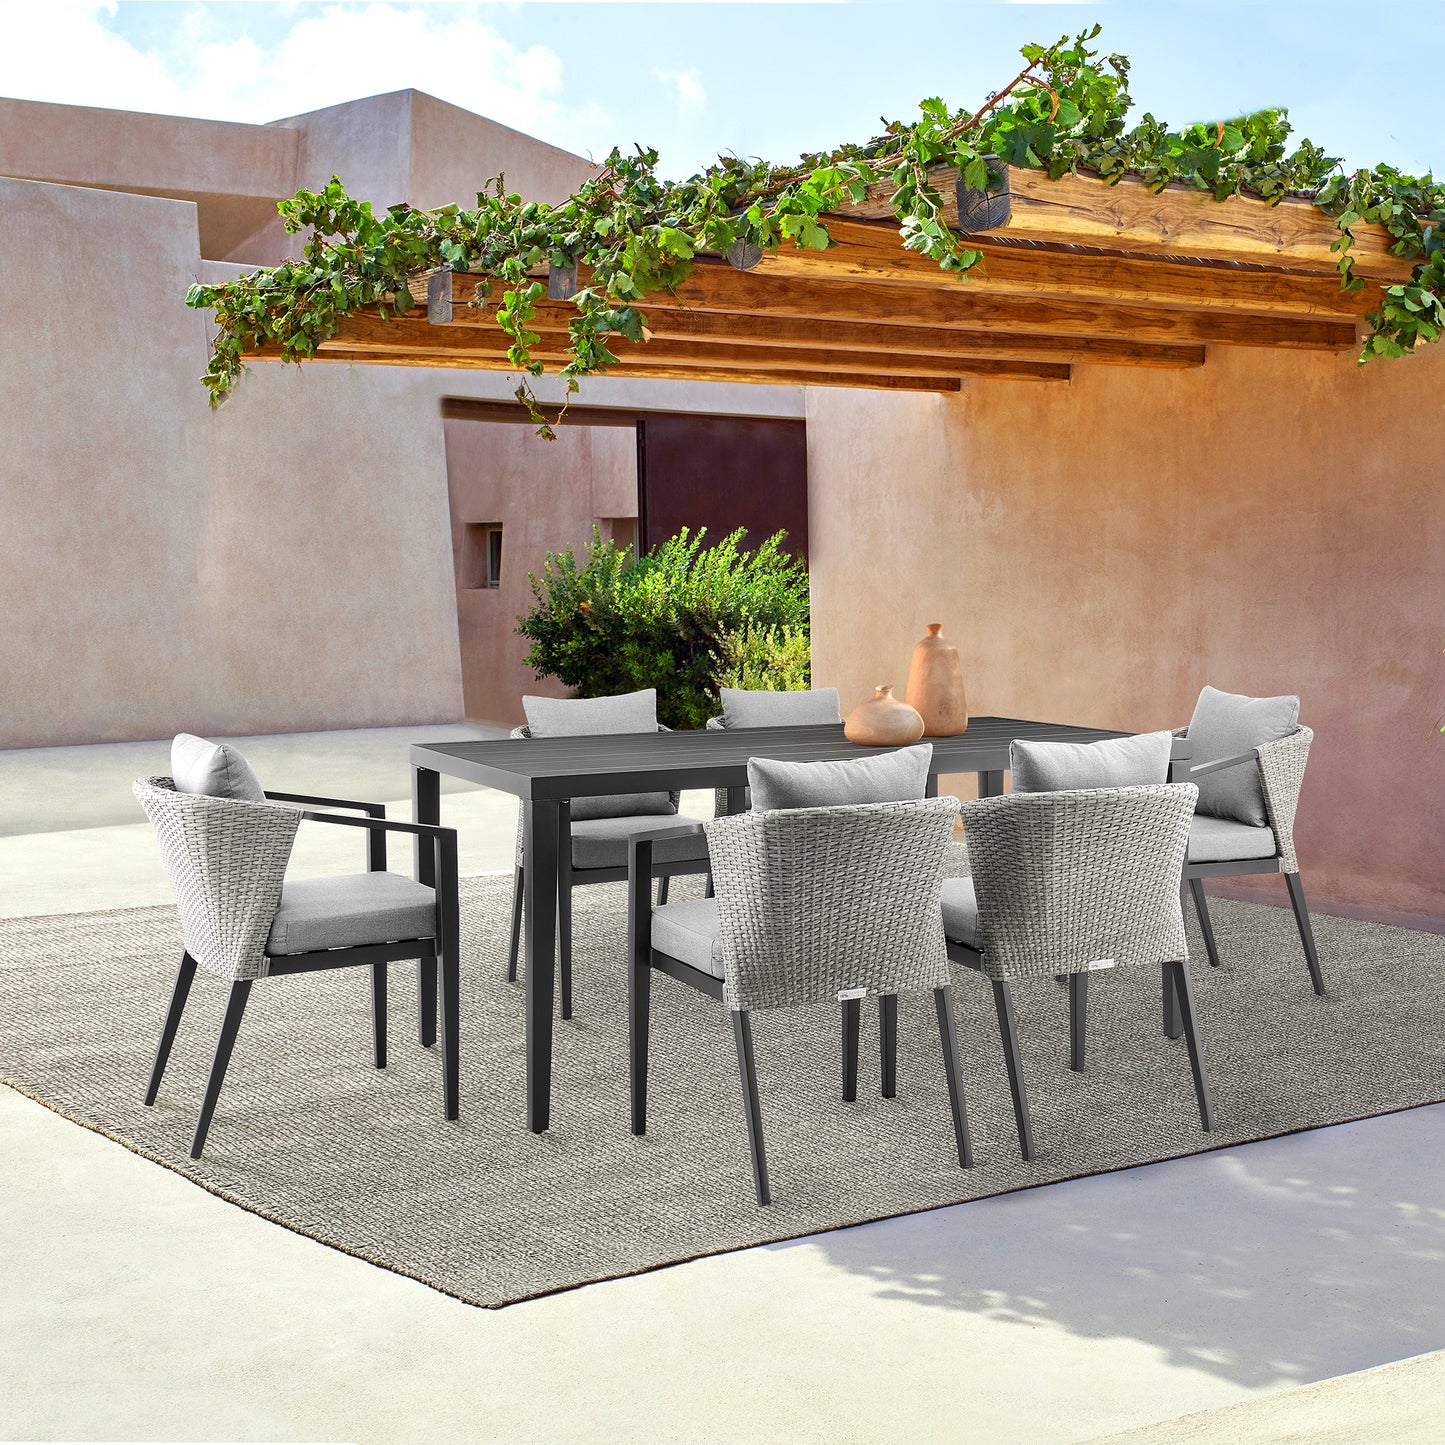 Palma Outdoor Patio 7-Piece Dining Table Set in Aluminum and Wicker with Gray Cushions